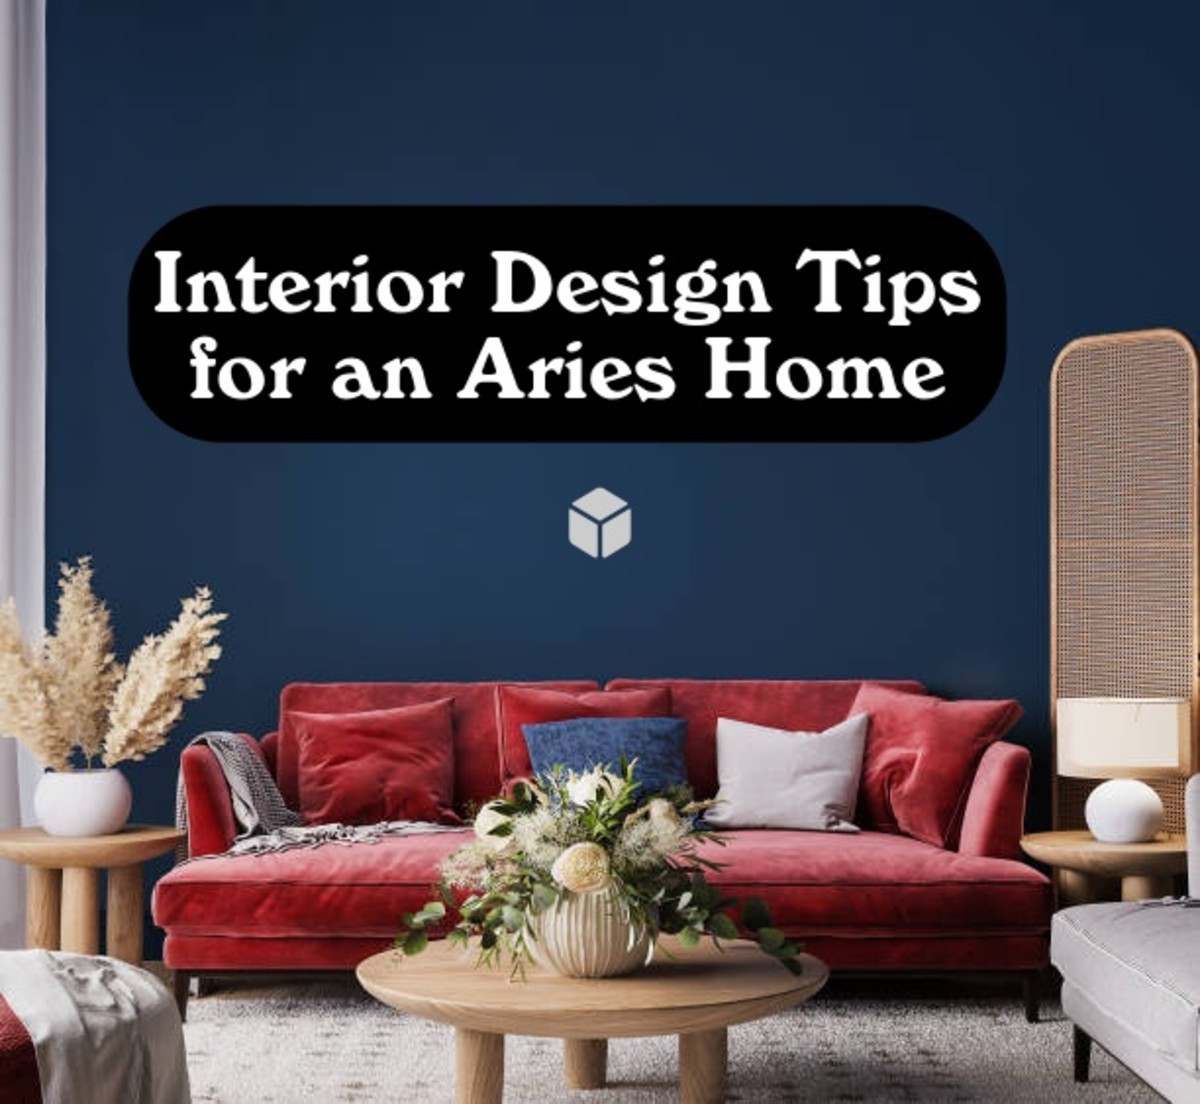 An Aries home should be colorful, daring, and dynamic. There should be lots of red. Use darker colors to express Aries' warring side and lighter colors for the sign's spring side.